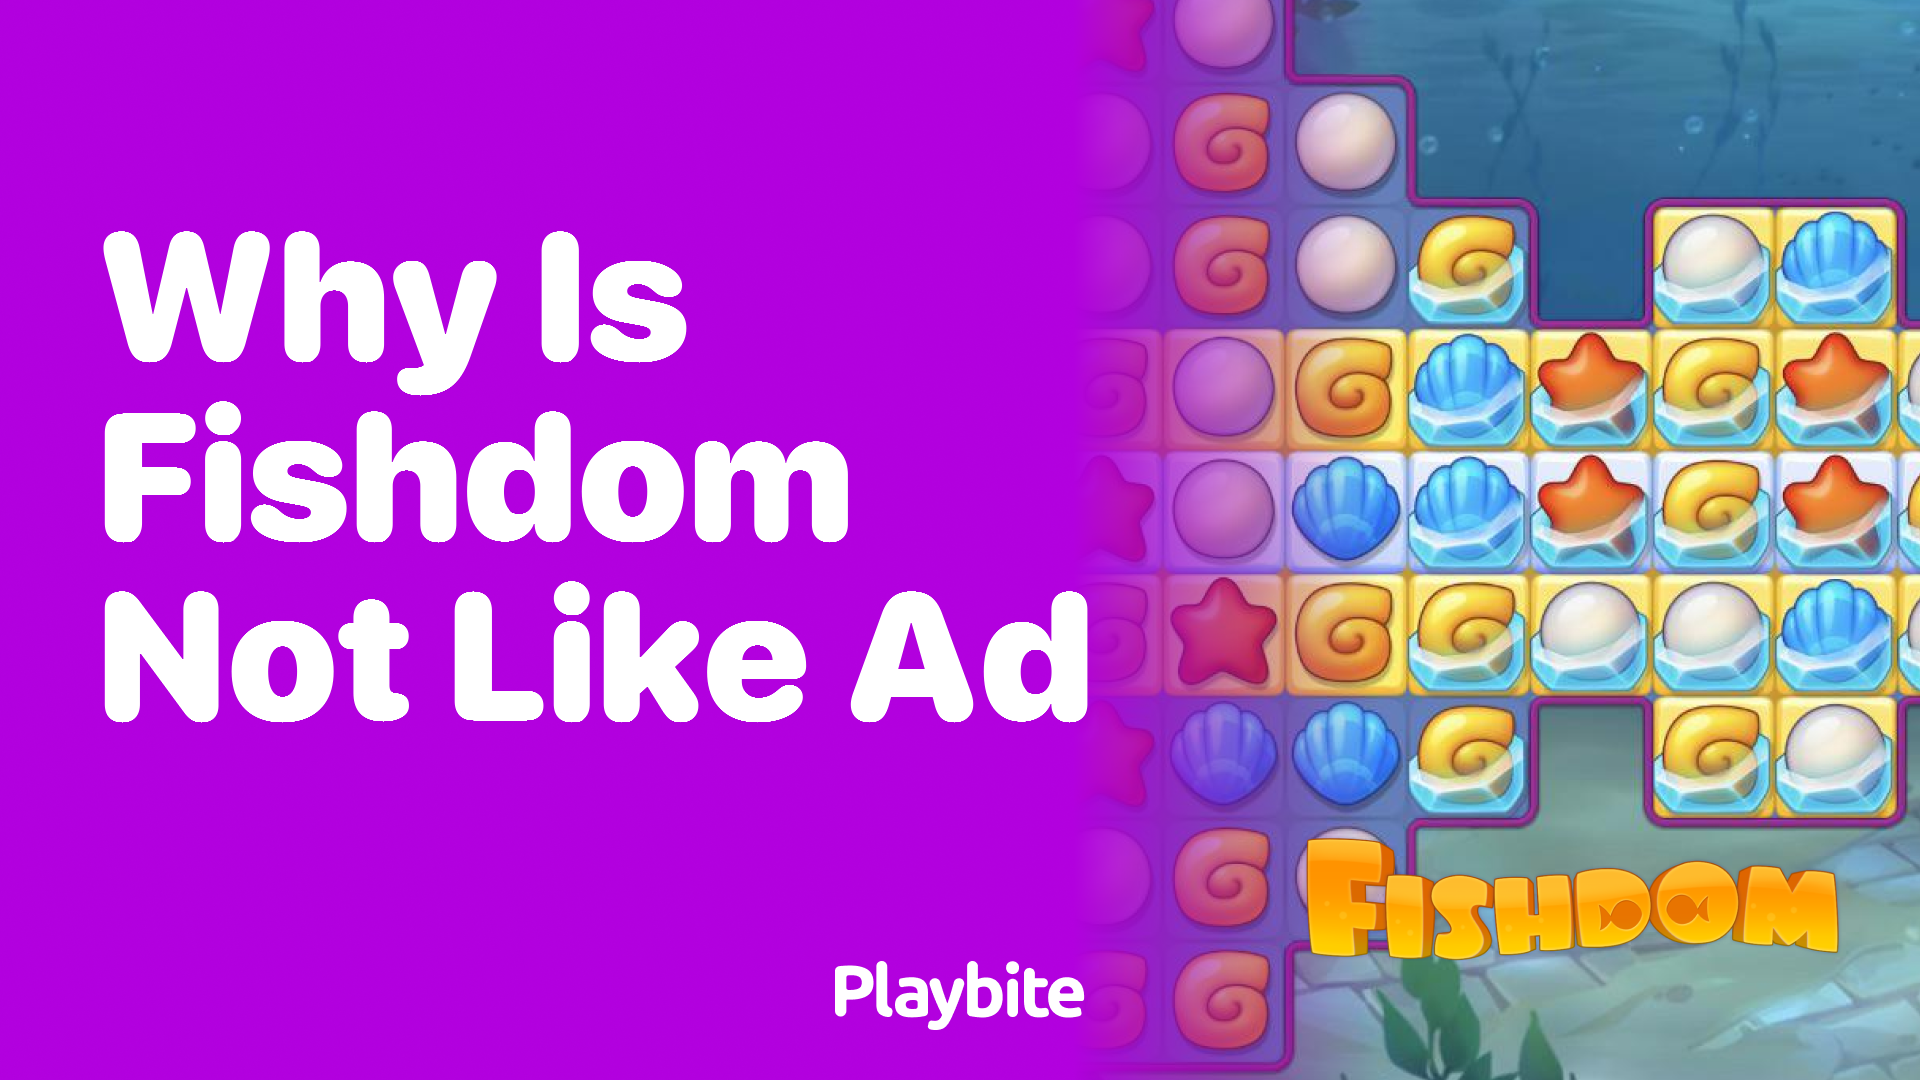 Why is Fishdom not like the ad?